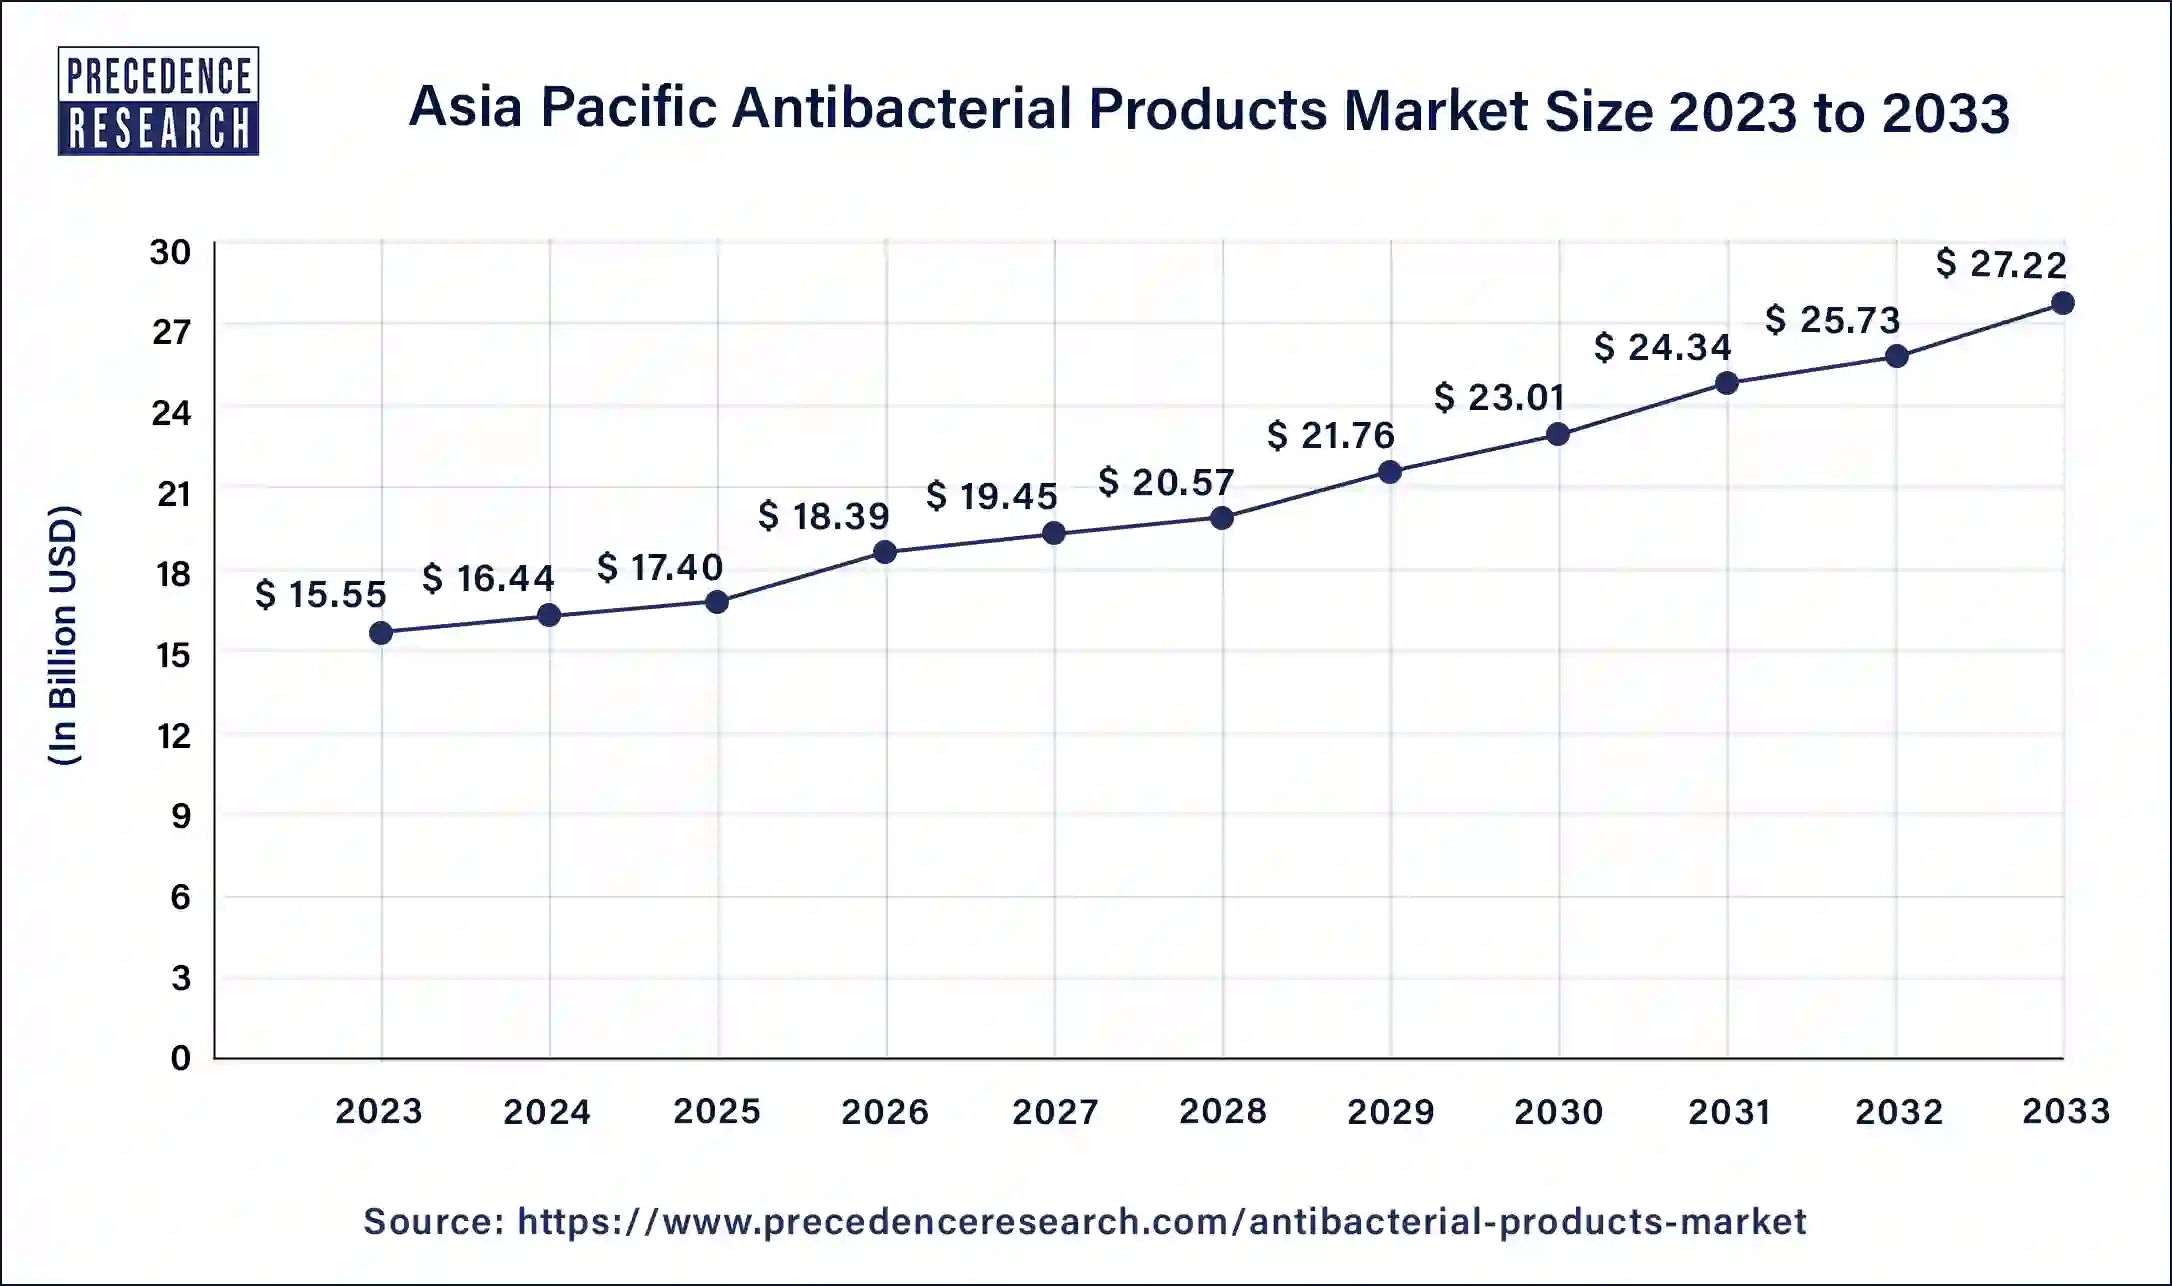 Asia Pacfic Antibacterial Products Market Size 2024 to 2033